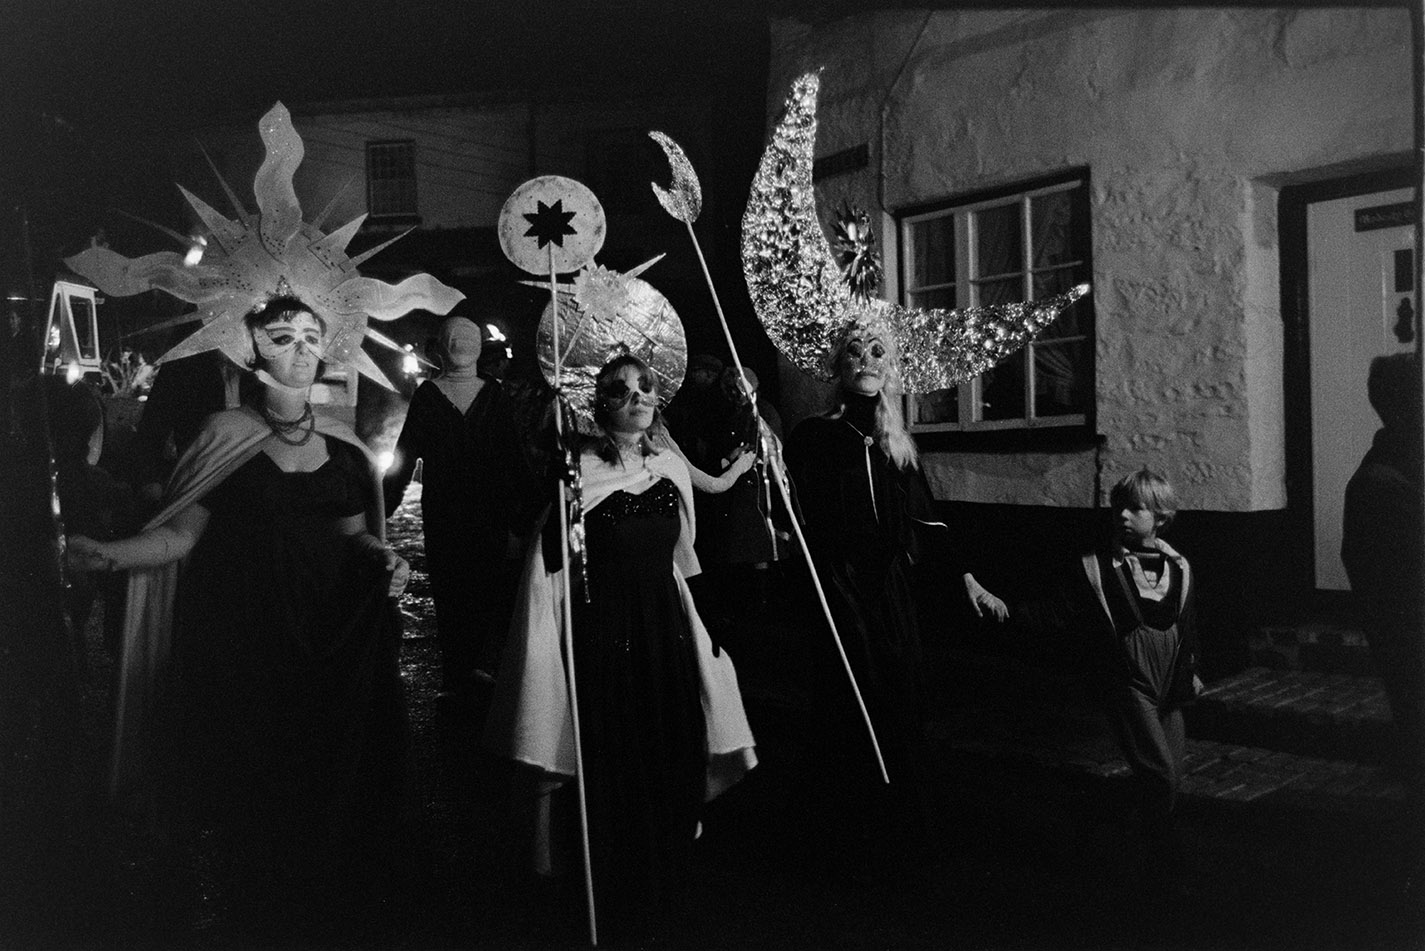 Carnival parade, women dressed as constellations, Hatherleigh, 6 November 1974